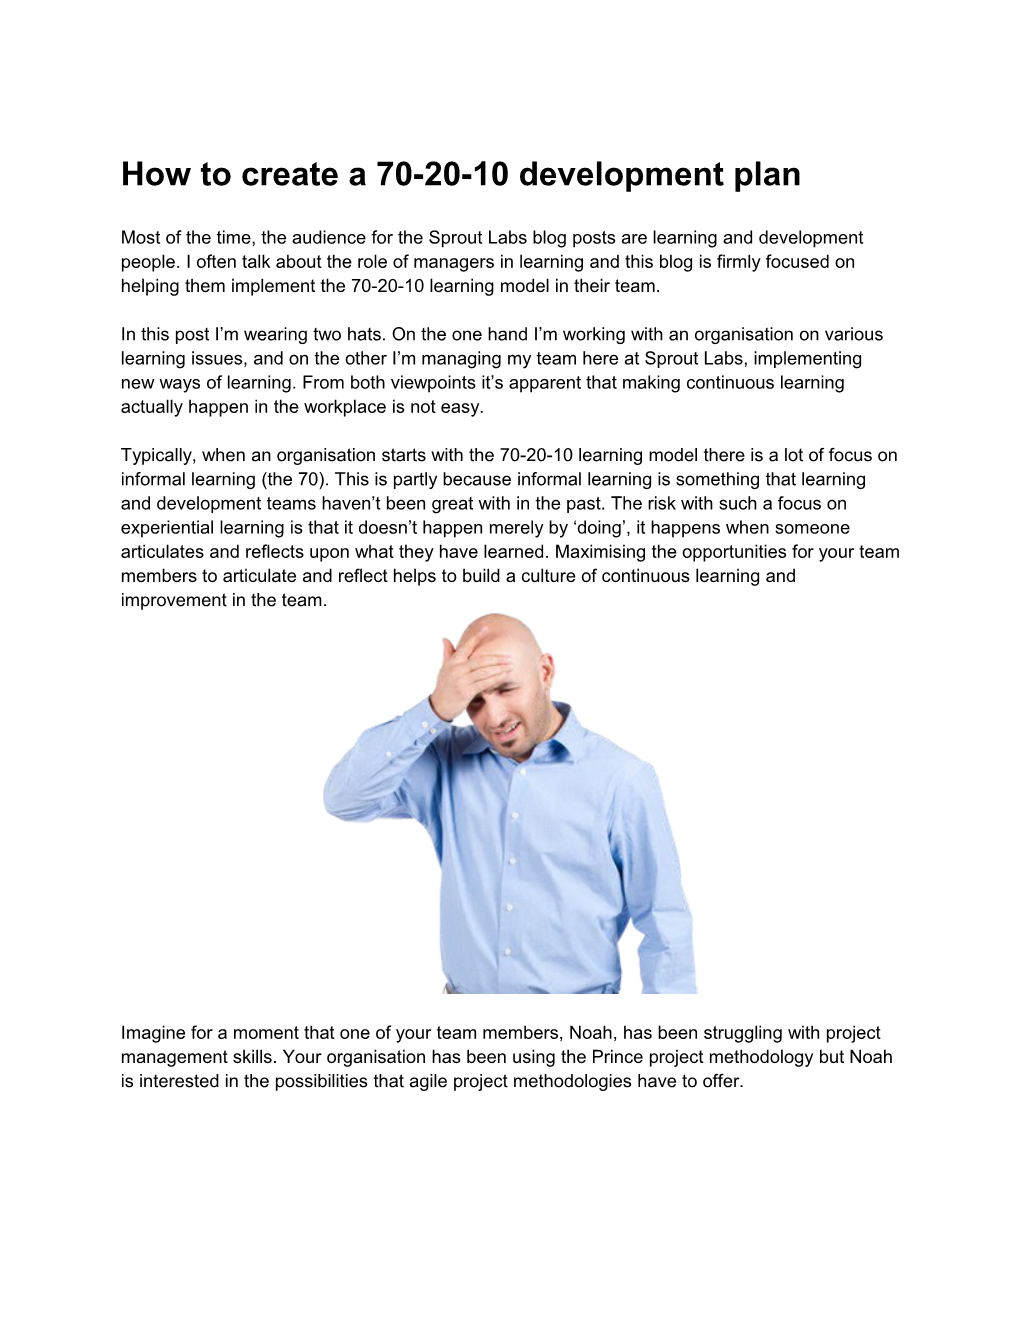 How to Create a 70-20-10 Development Plan